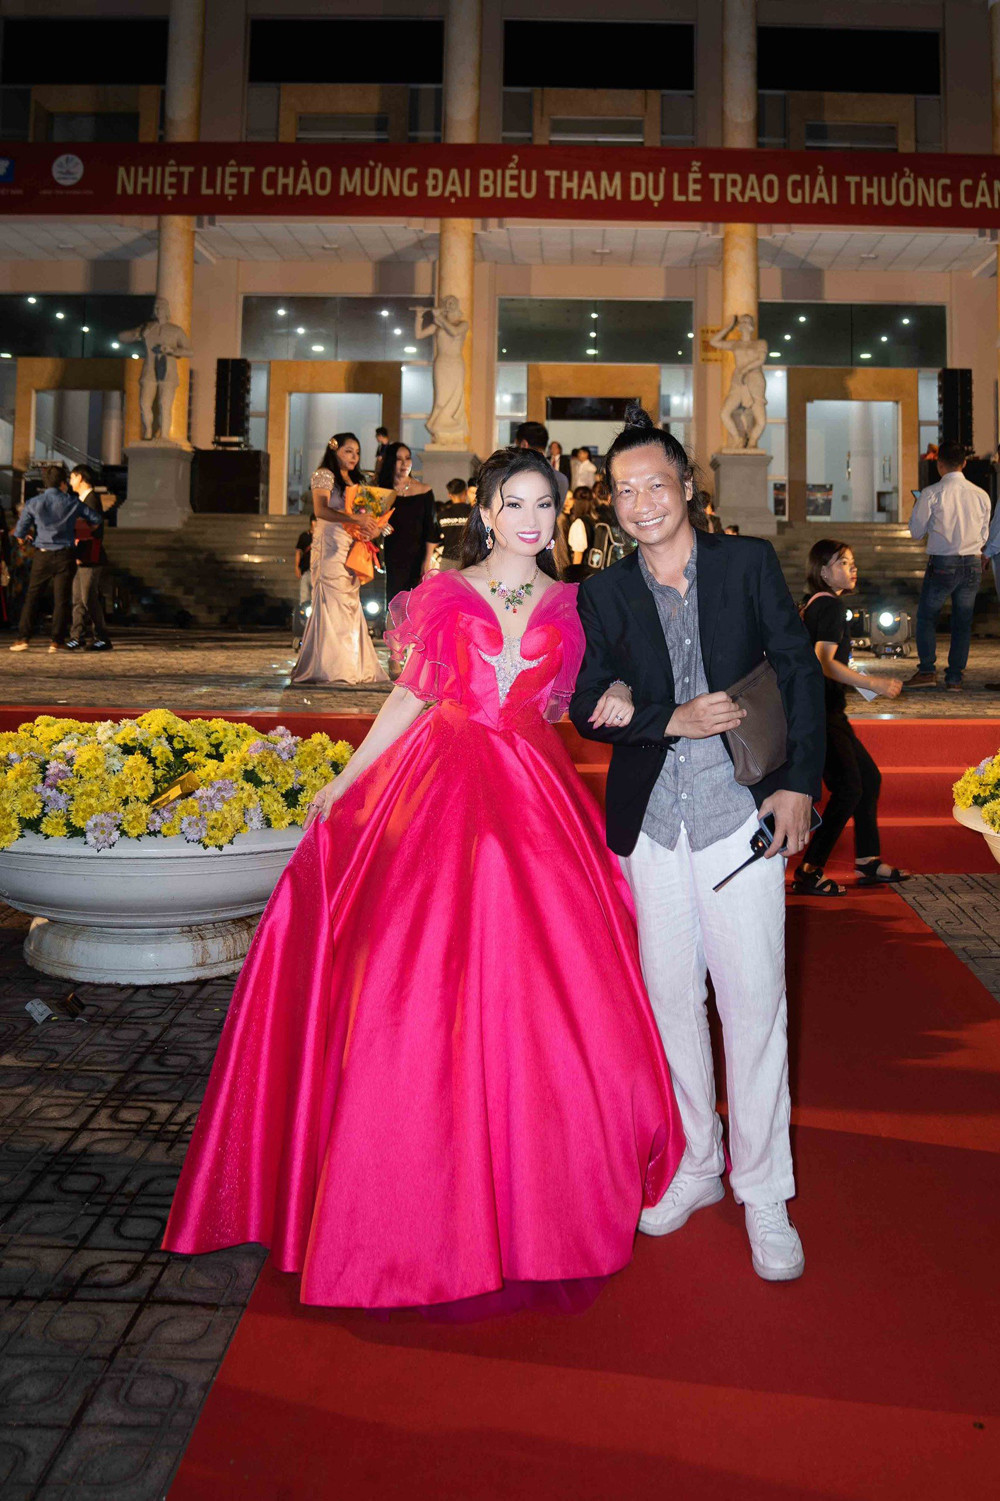 Billionaire Singer' Ha Phuong: Vn Cinema Will Rise To New Heights